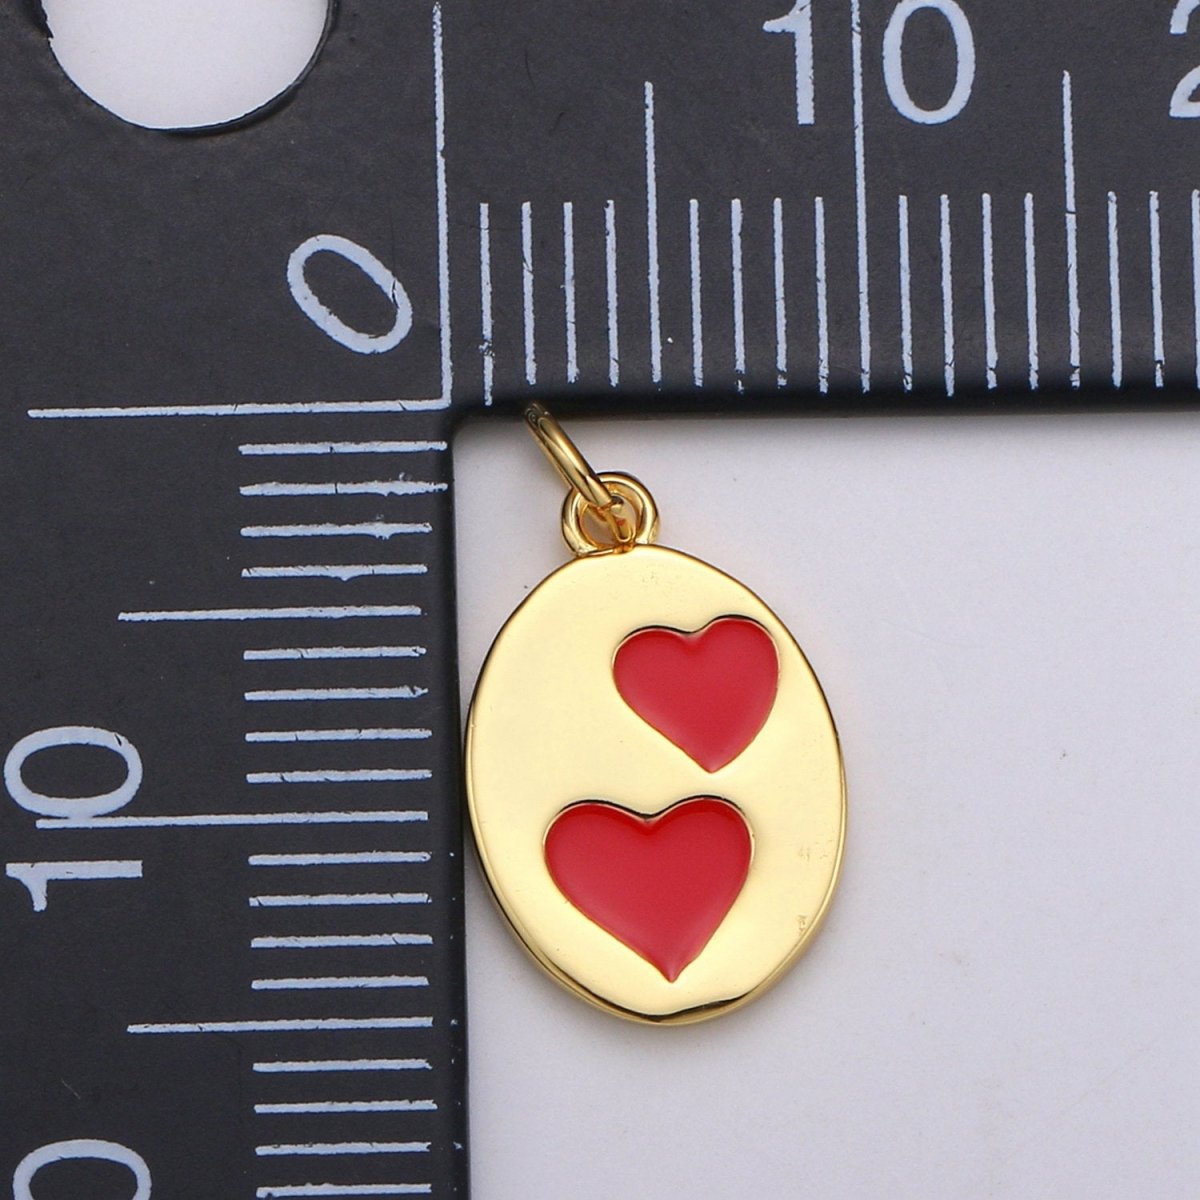 Oval Red Heart Charm - Dainty Gold Double Heart Add On Charm - Dainty Heart - Love Inspired Gold Filled Heart Pendant Couple Jewelry D-713 - DLUXCA